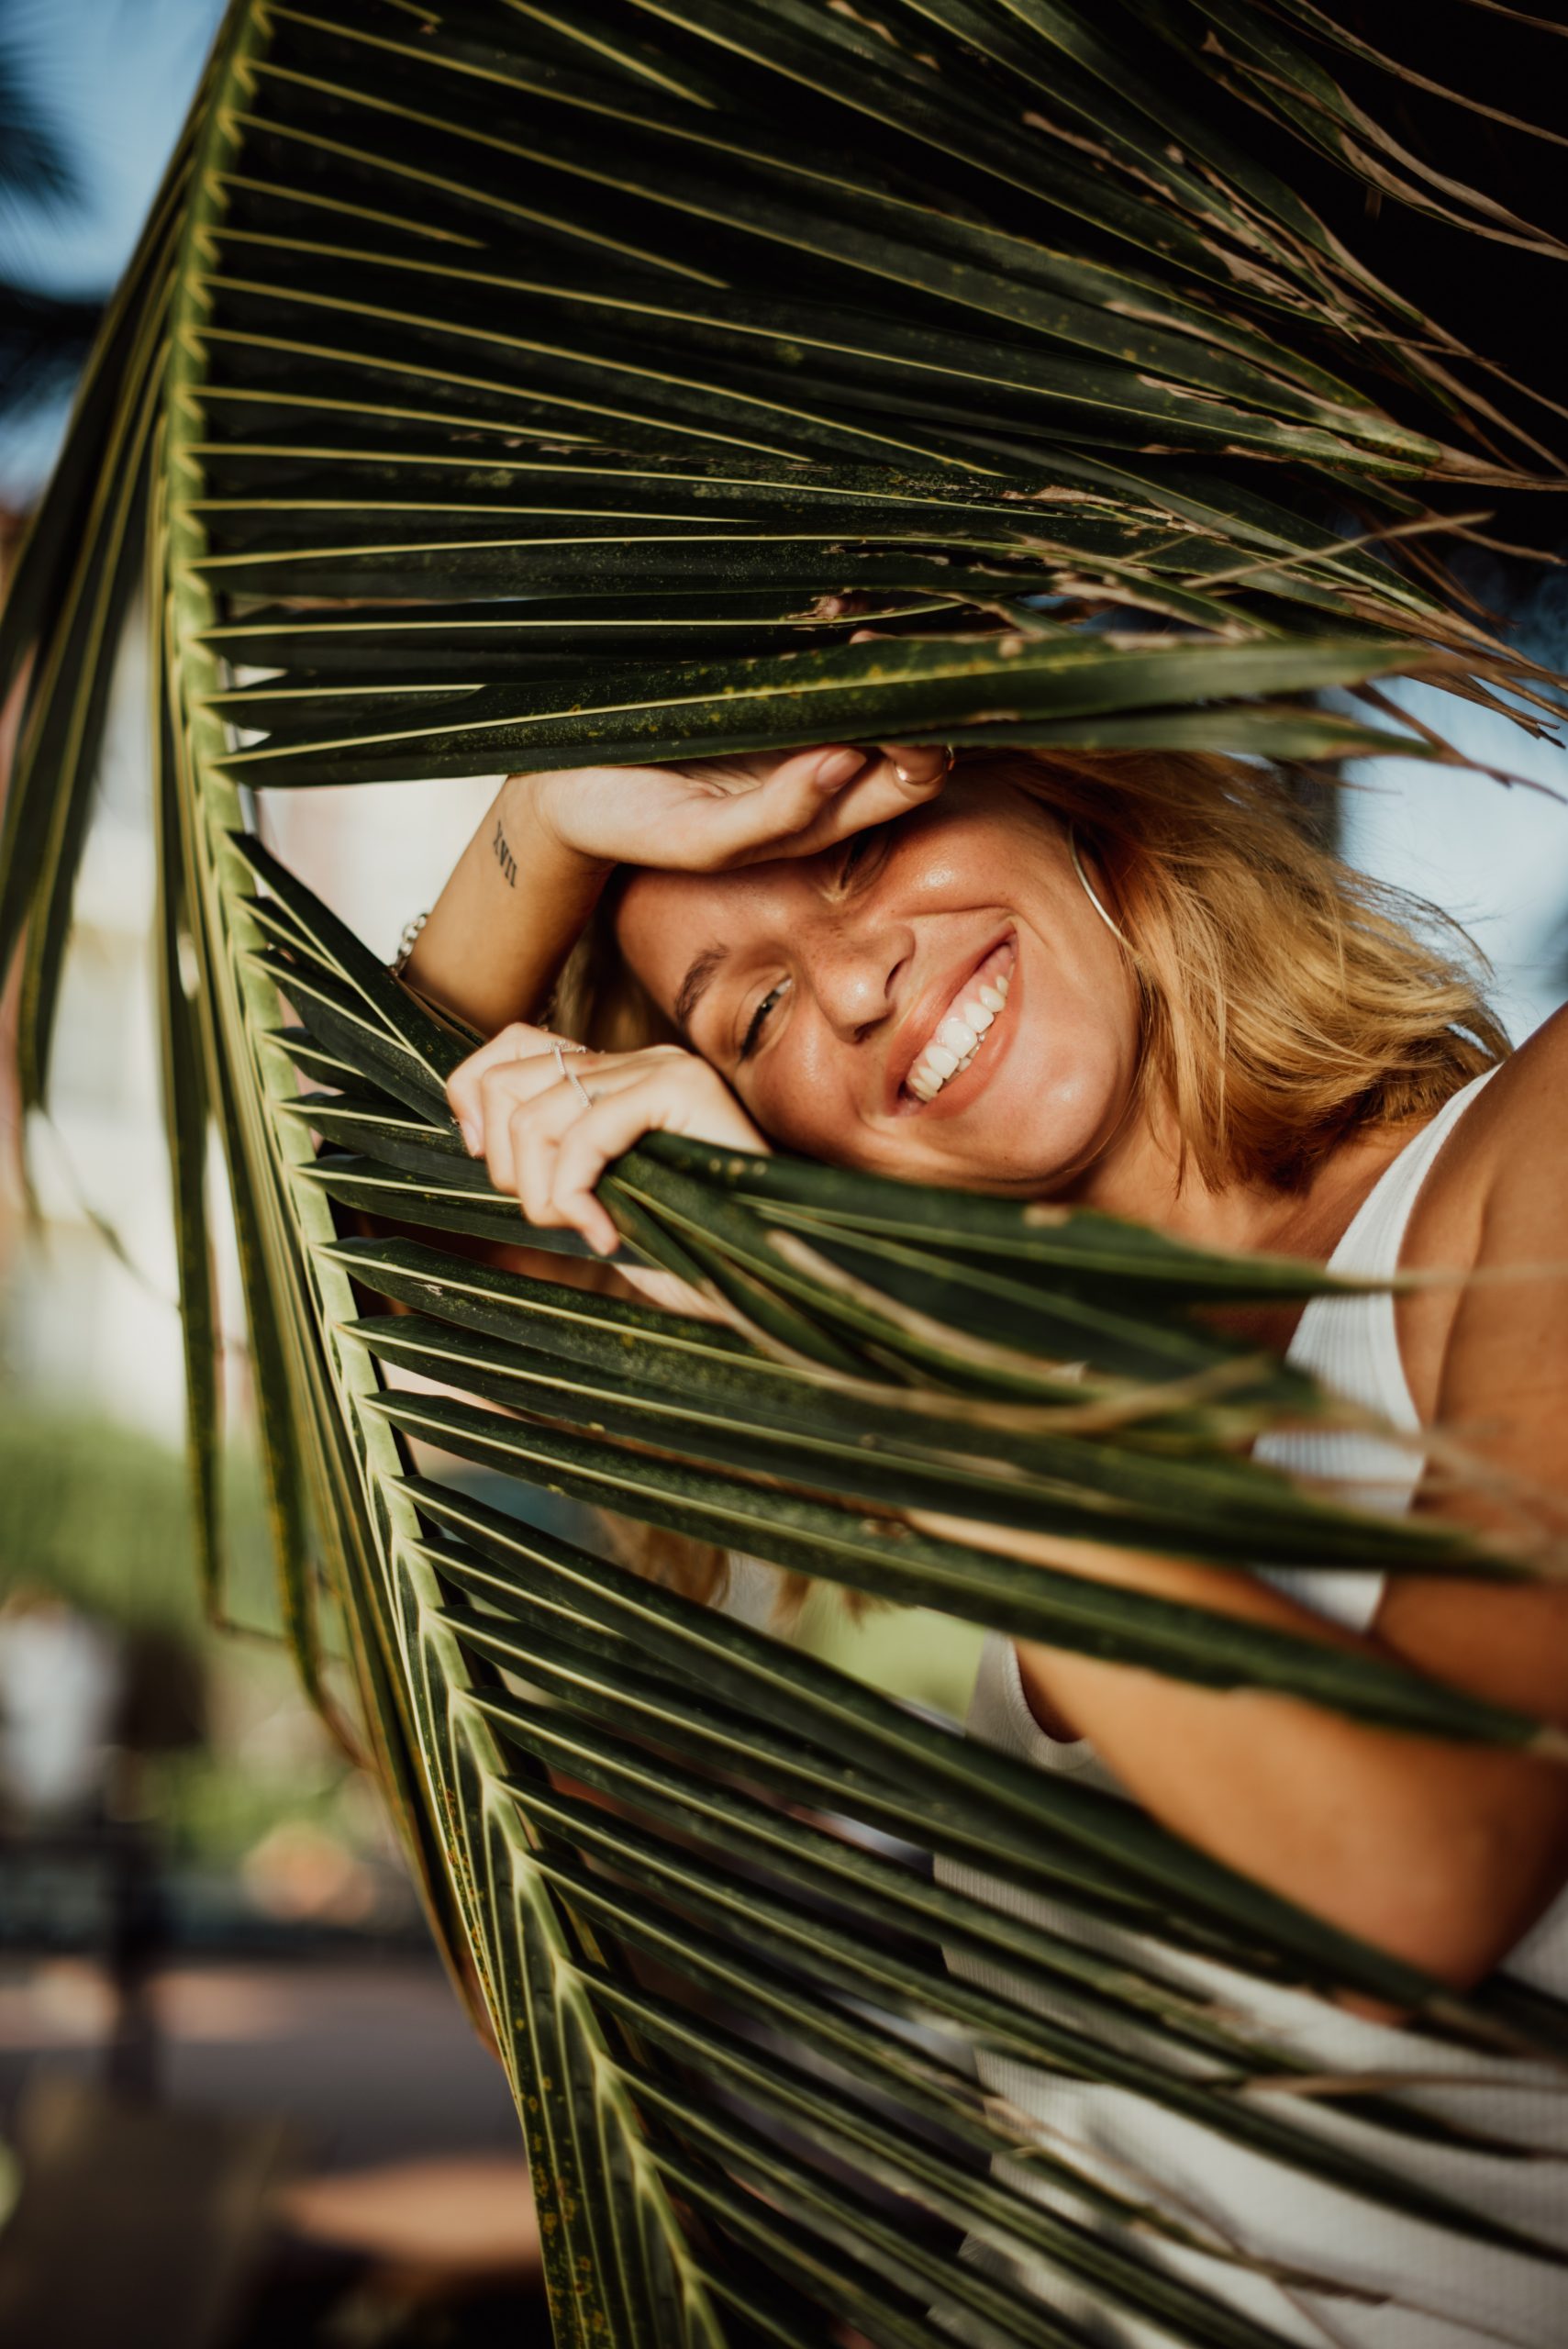 A joyful woman peeks through large palm leaves, smiling broadly and covering her forehead with her hand, immersed in a sunny, tropical setting.